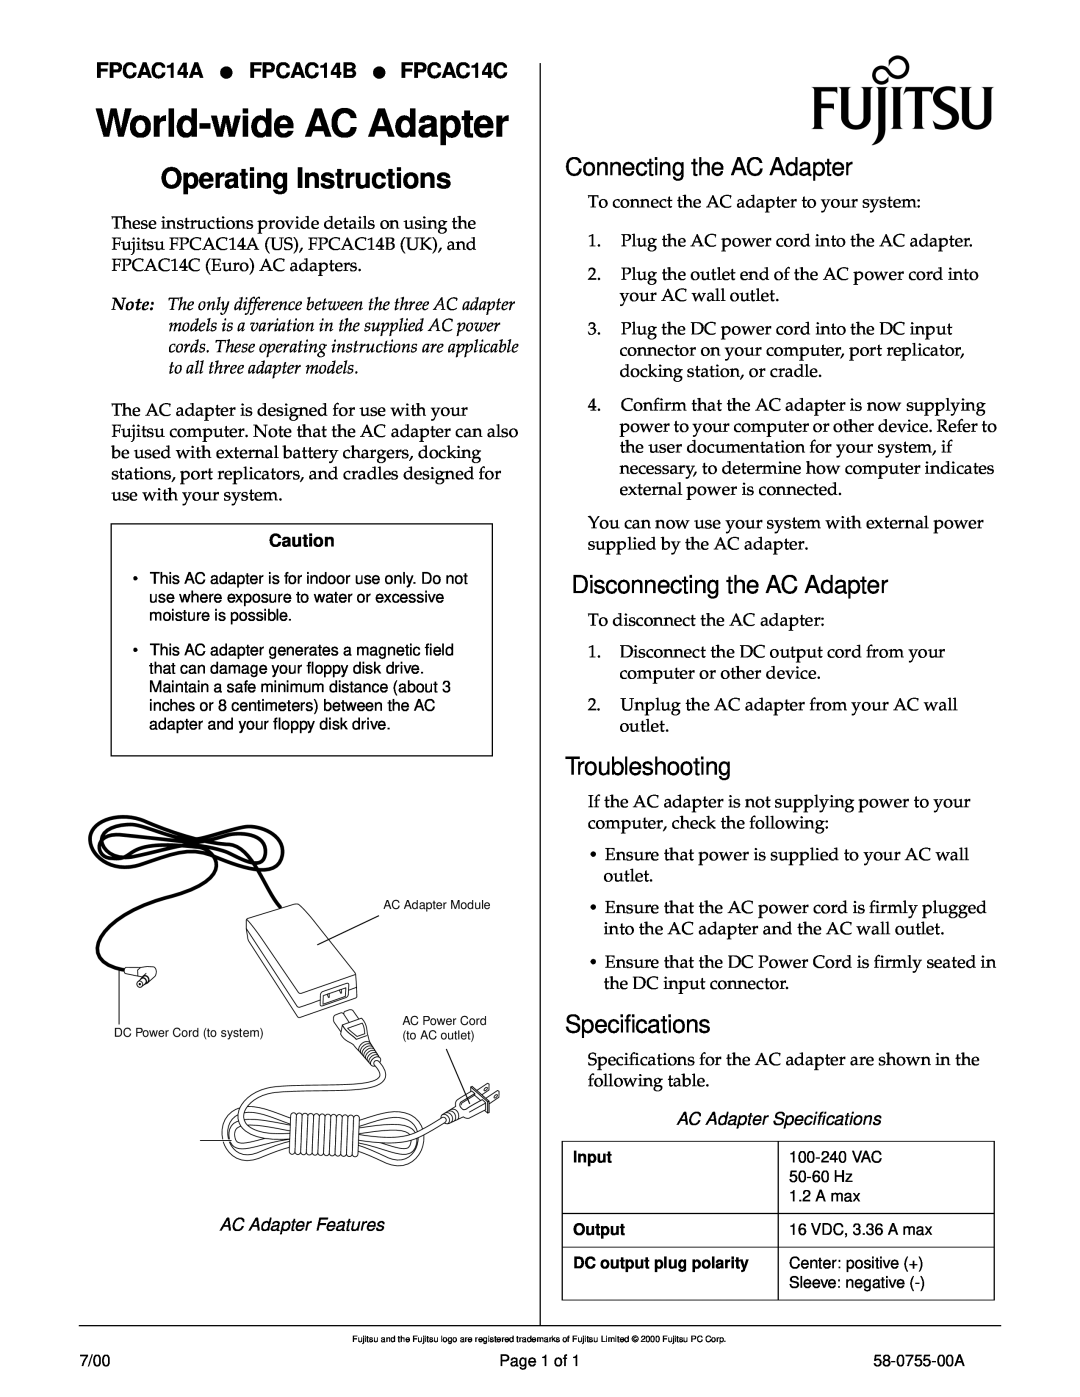 Fujitsu FPCAC14C specifications World-wide AC Adapter, Operating Instructions, Connecting the AC Adapter, Troubleshooting 